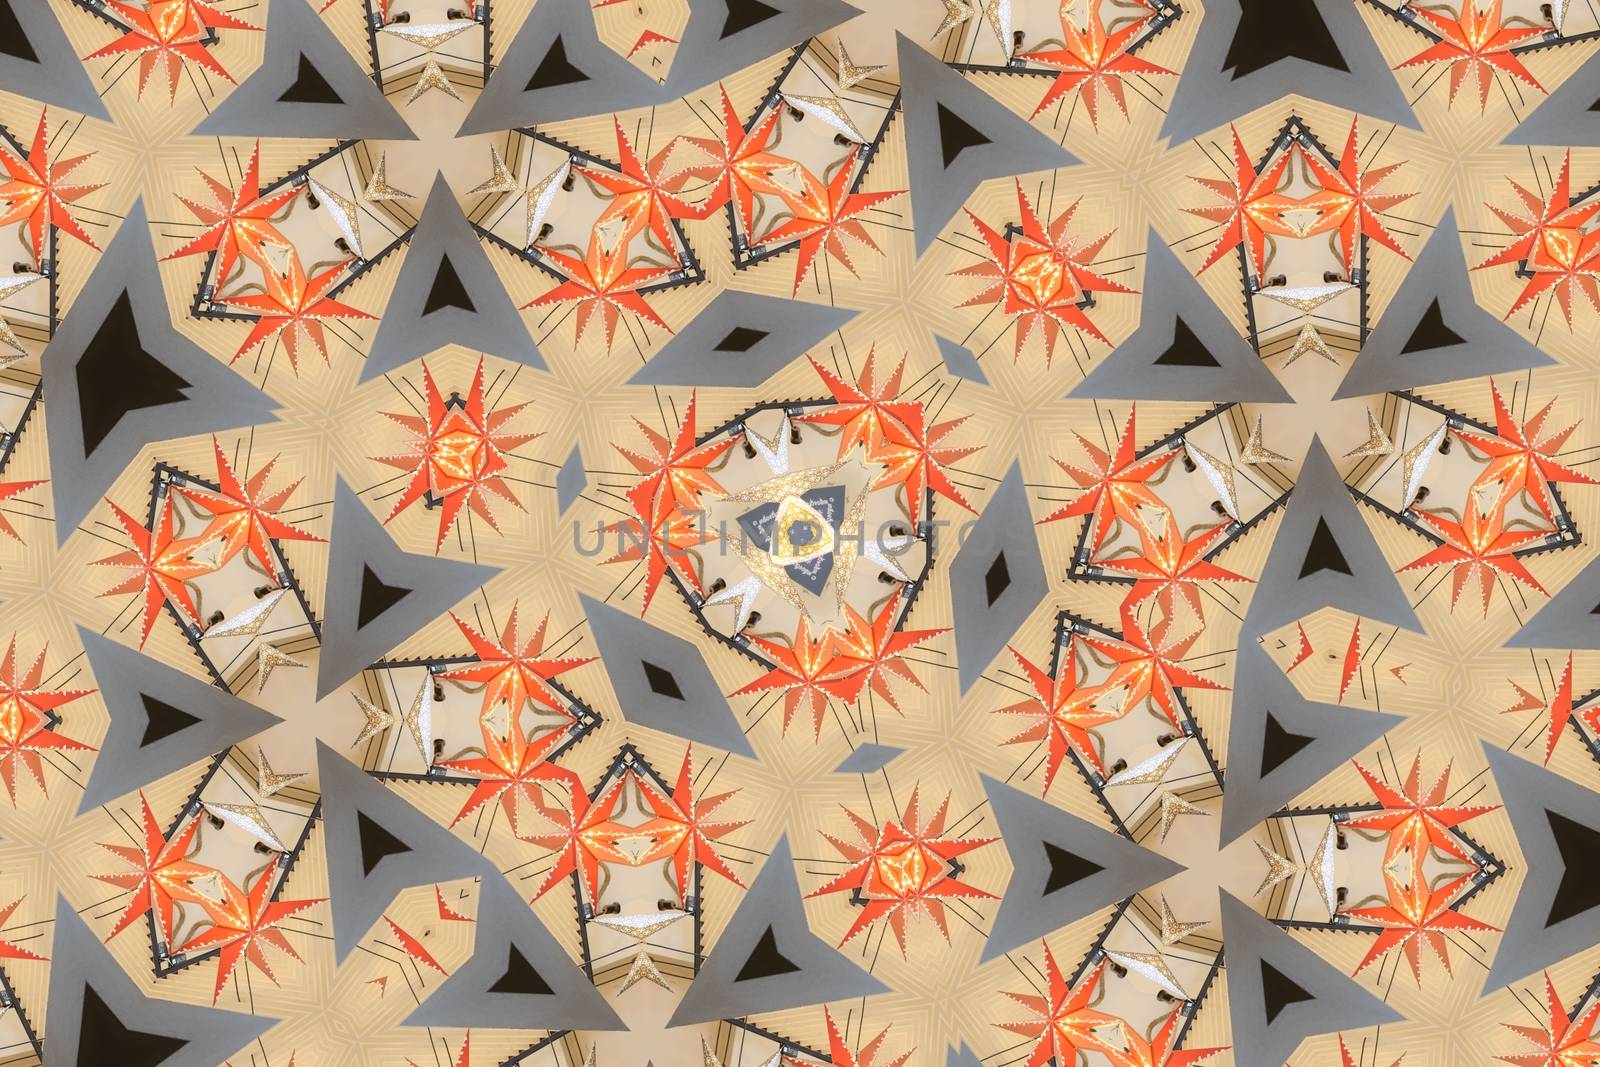 Abstract reflection of Christmas star image for background use, kaleidoscope image by peerapixs